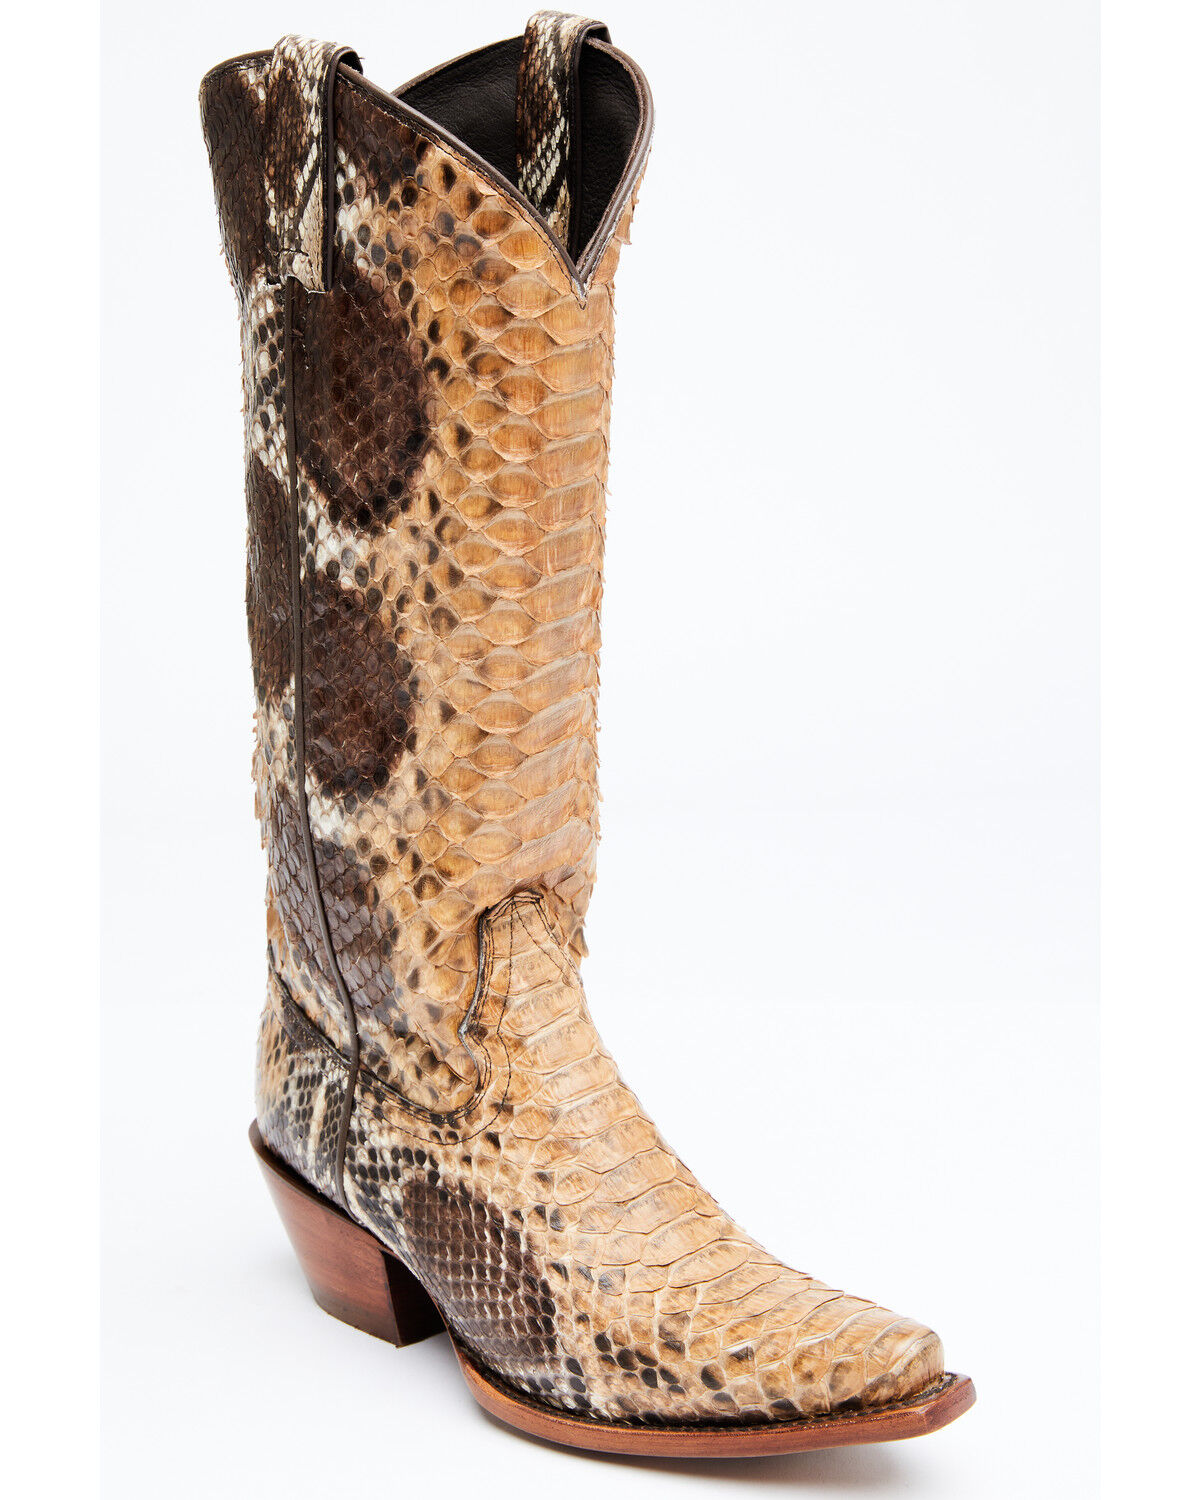 Details about   New Women's Western Pattern Cowgirl Pointed Toe Boots Snakeskin Print Size 34-46 